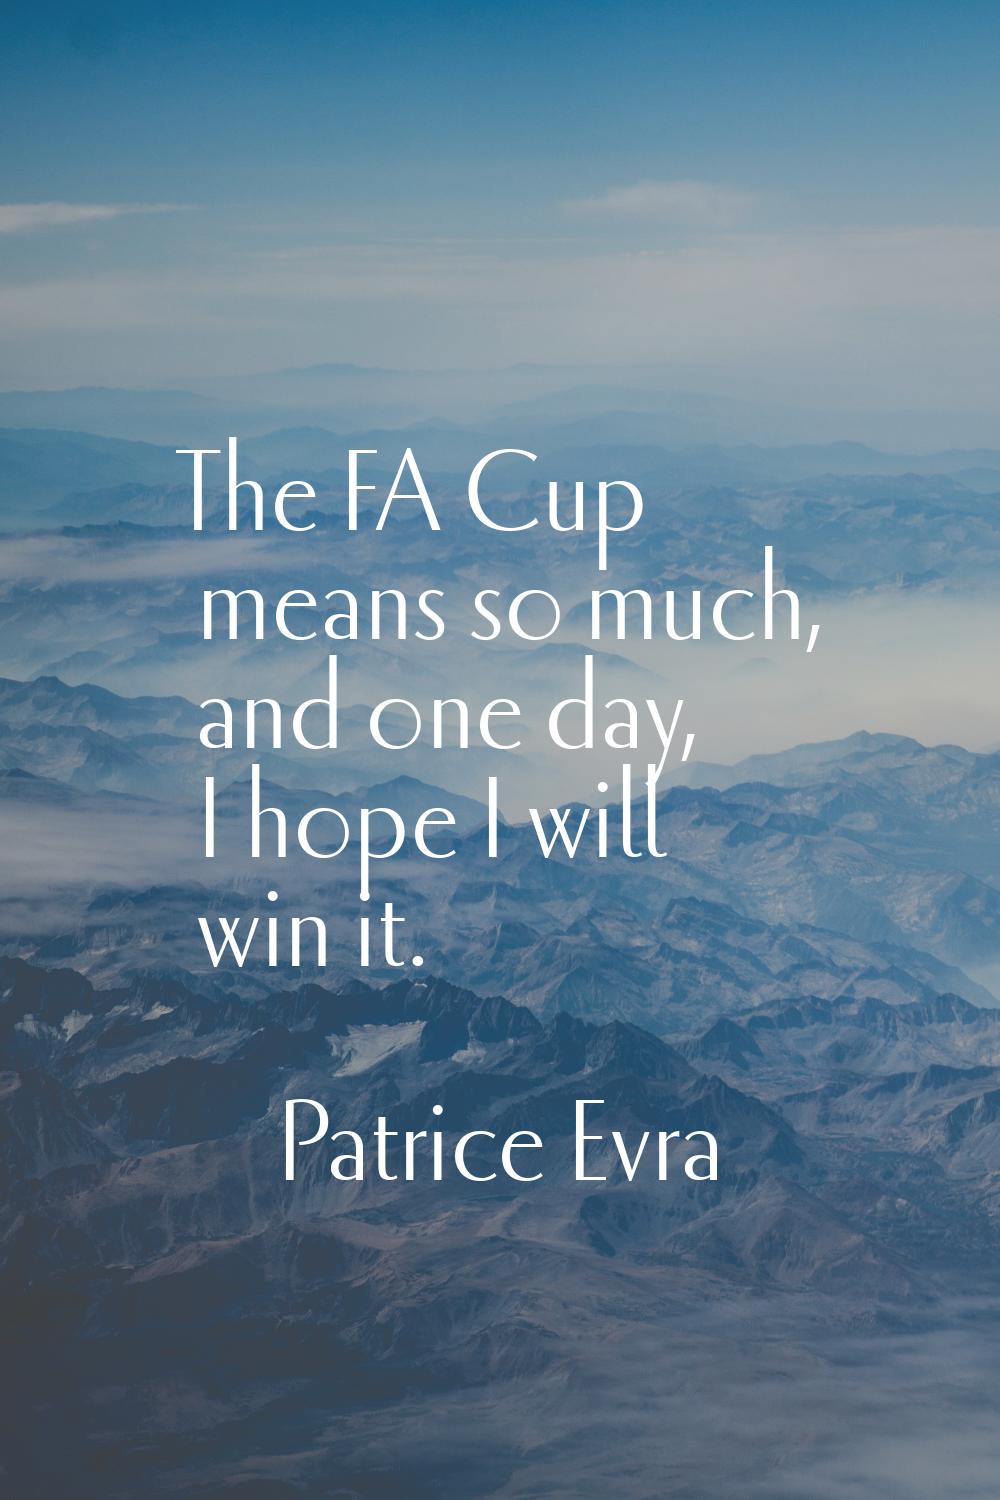 The FA Cup means so much, and one day, I hope I will win it.